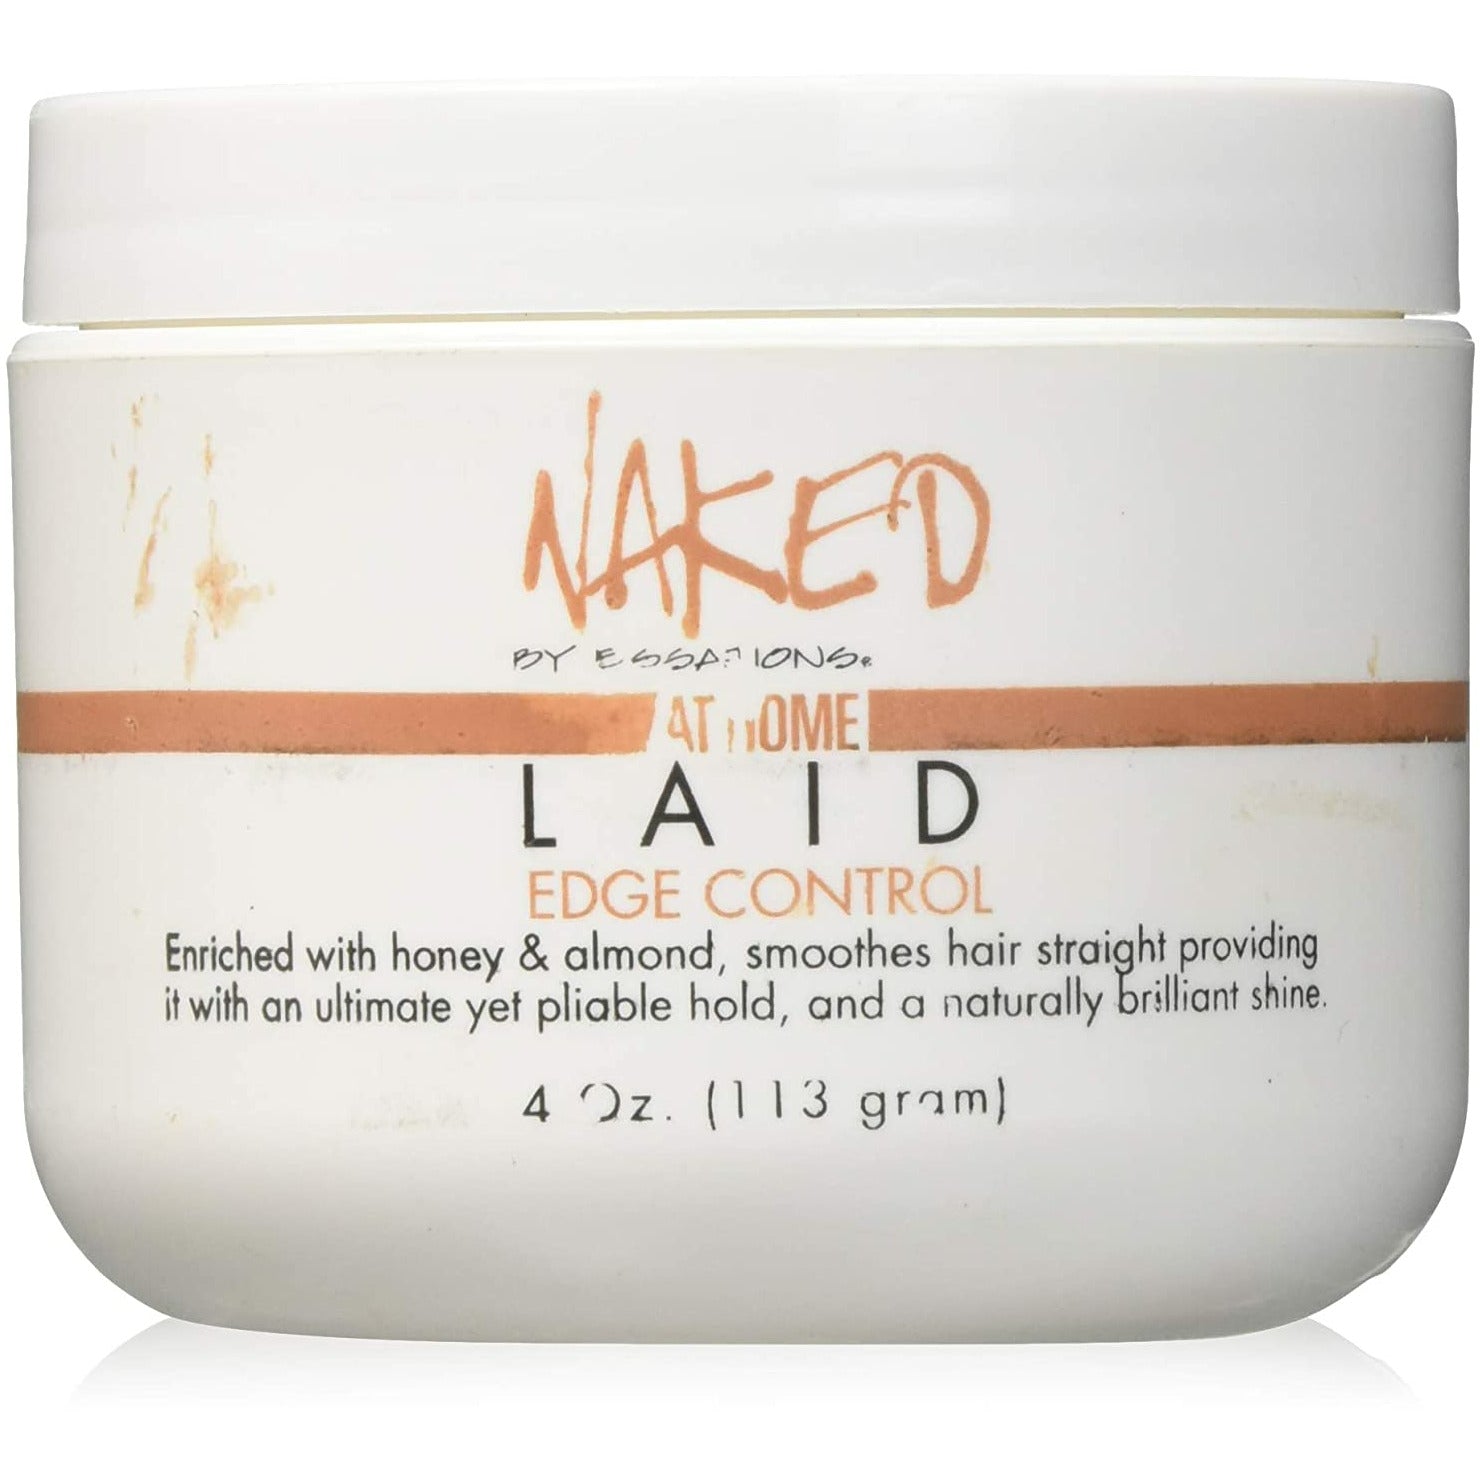 Naked By Essations Laid Edge Control, 4 Oz